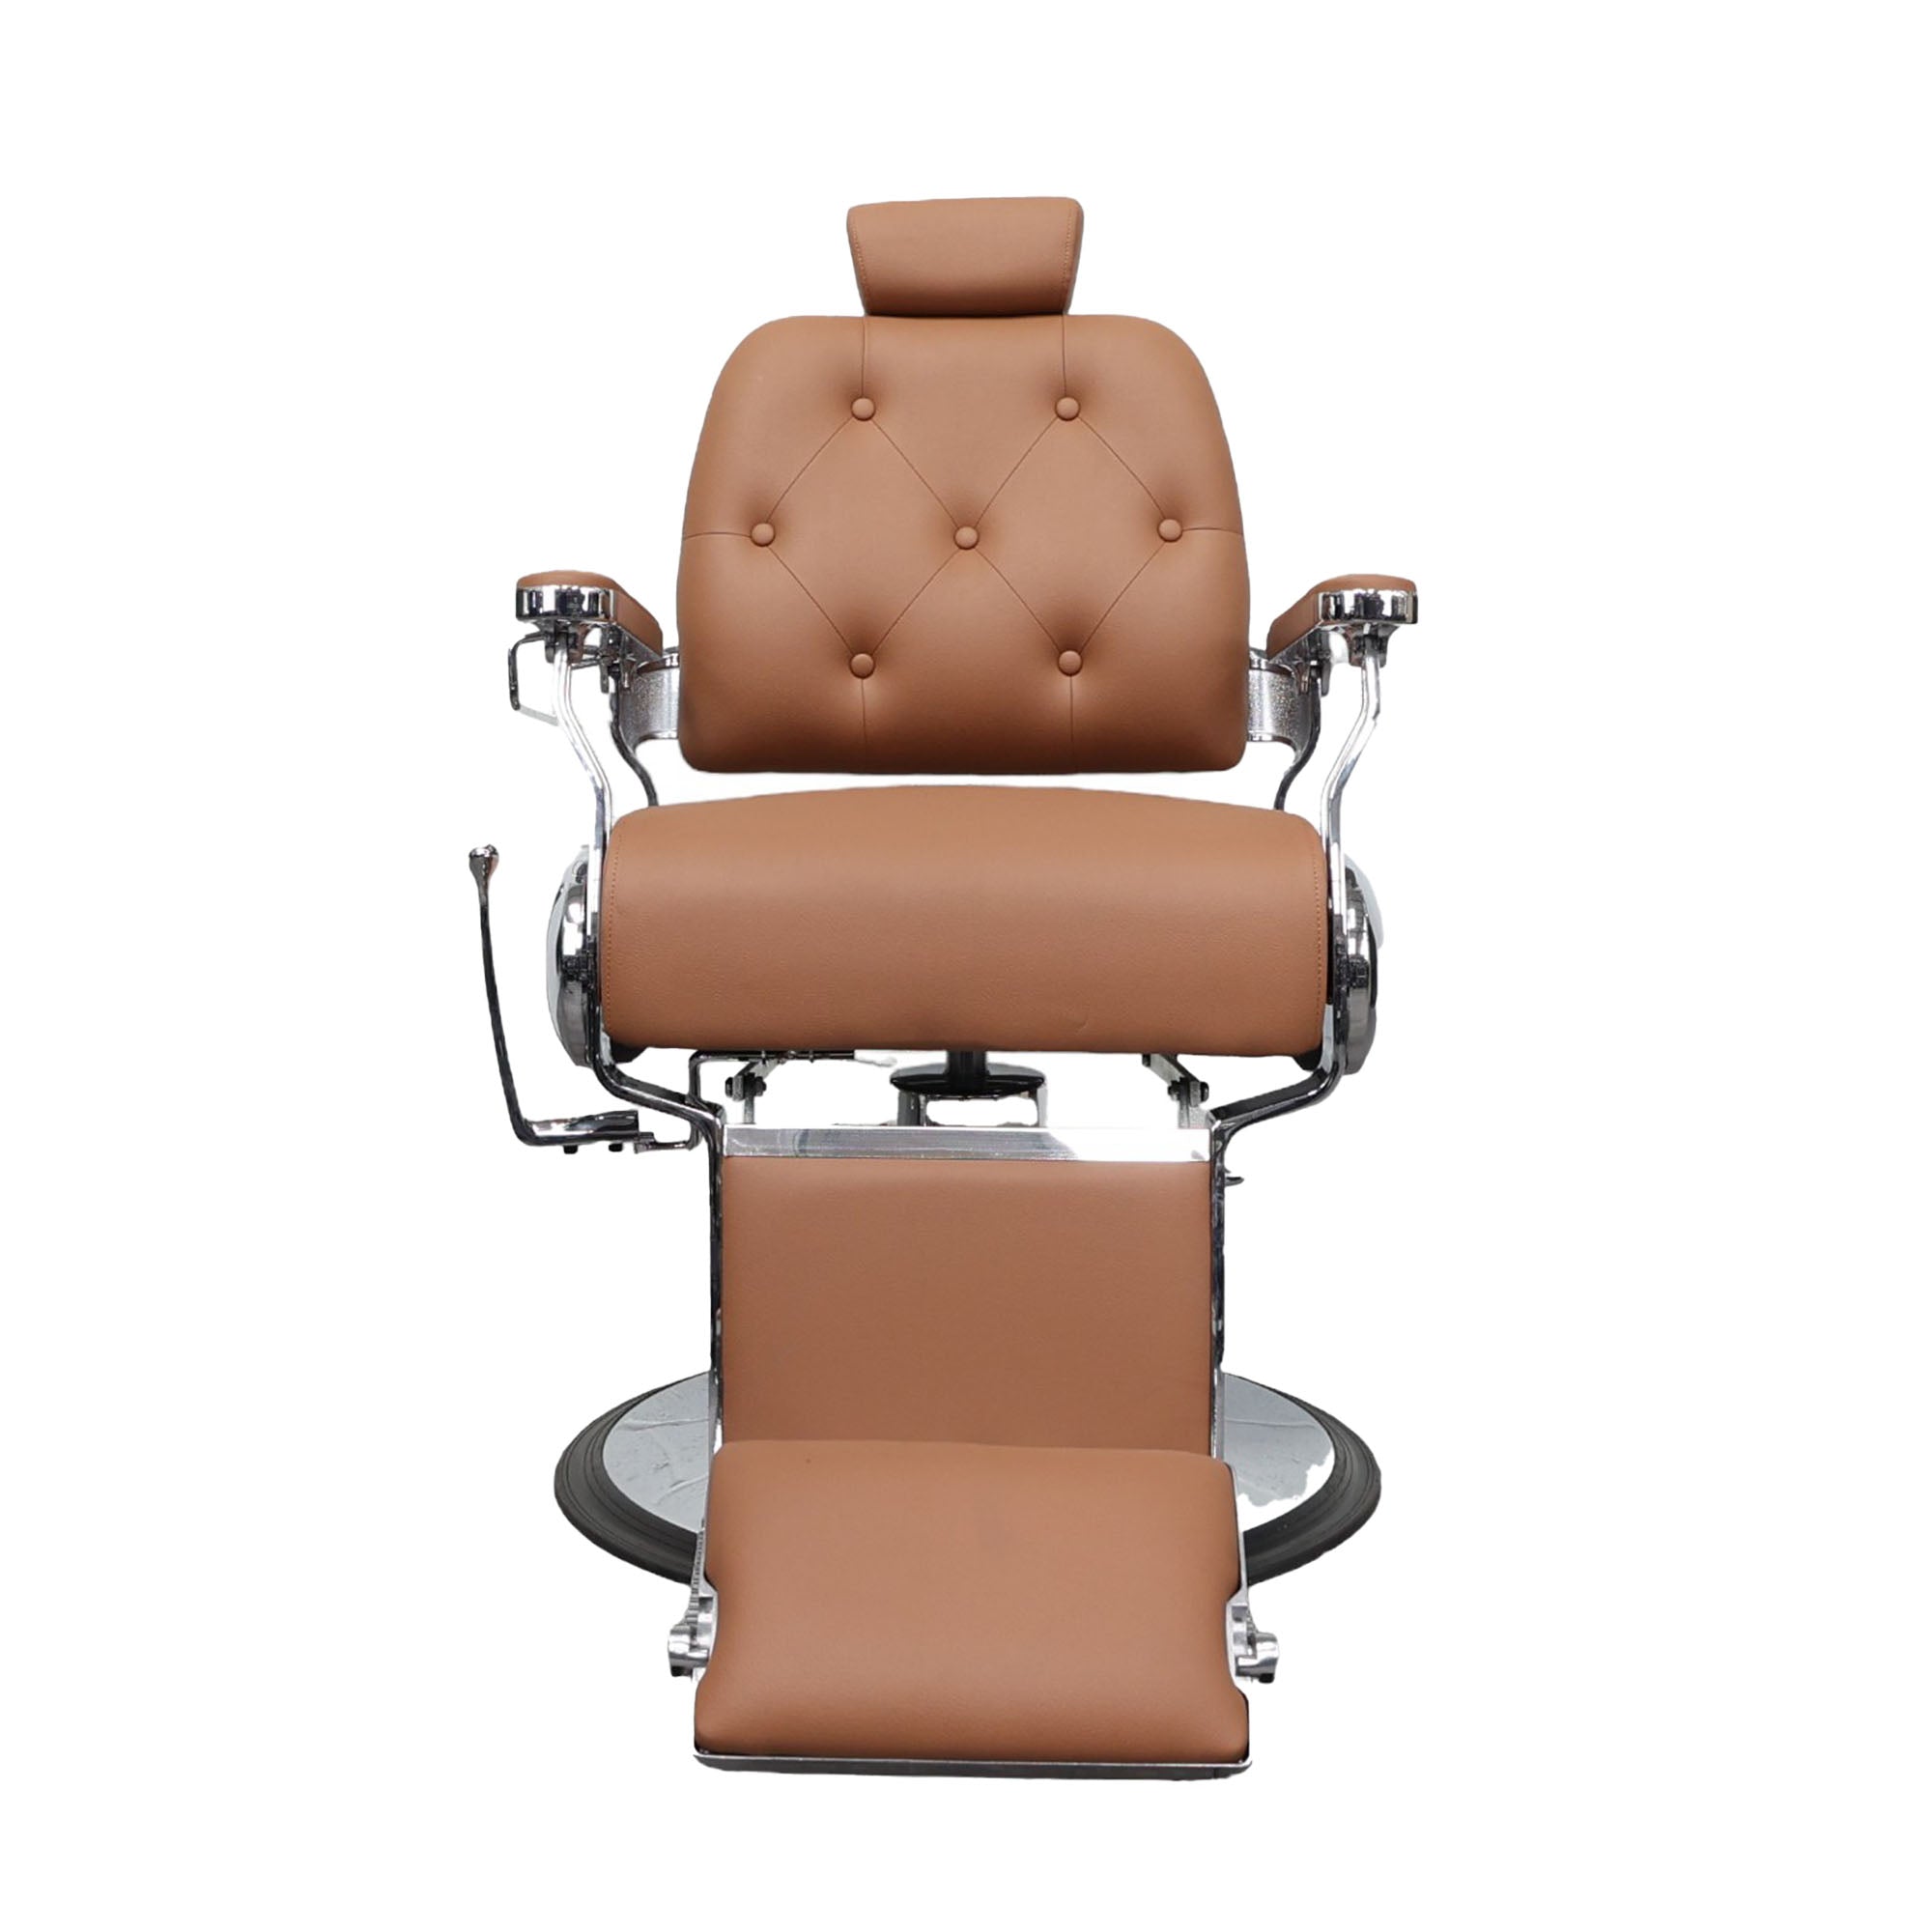 Barber Chair - Luxurious Camel Leather with Chrome Accents